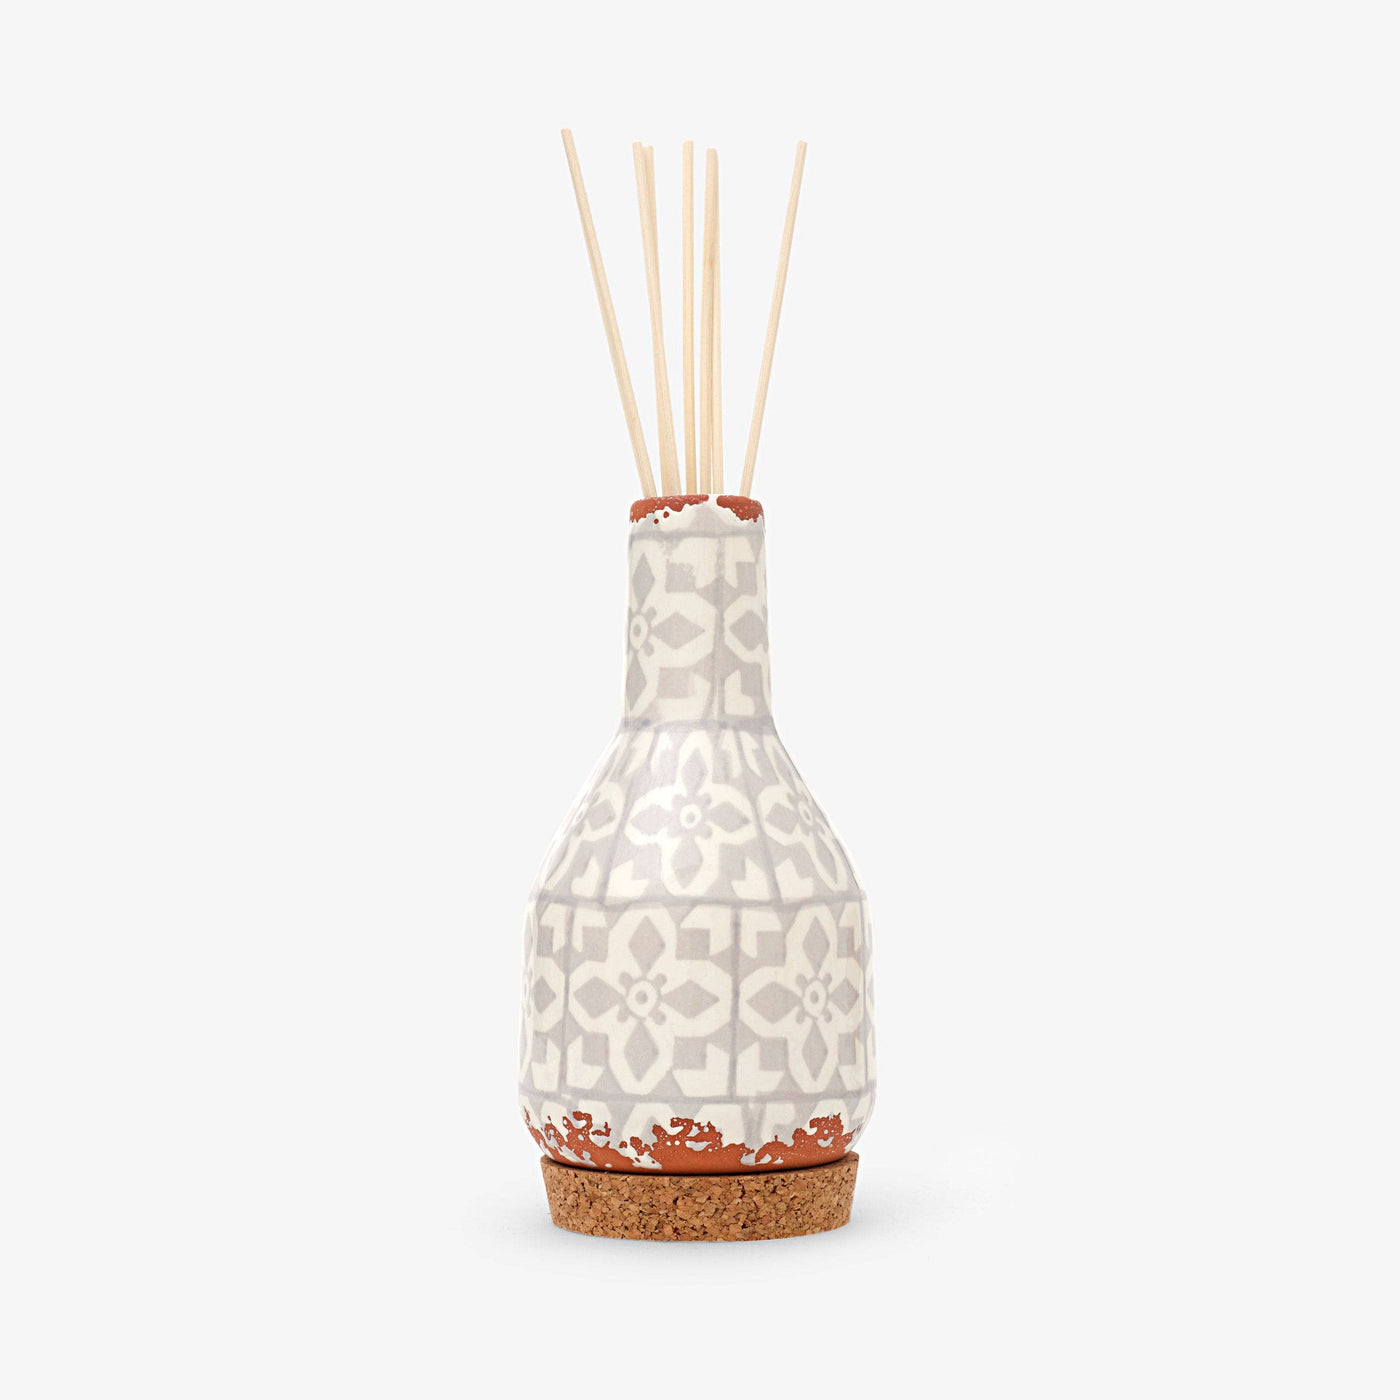 Mikado Fig Diffuser With Rattan Reeds, Beige, 150 ml Diffusers sazy.com